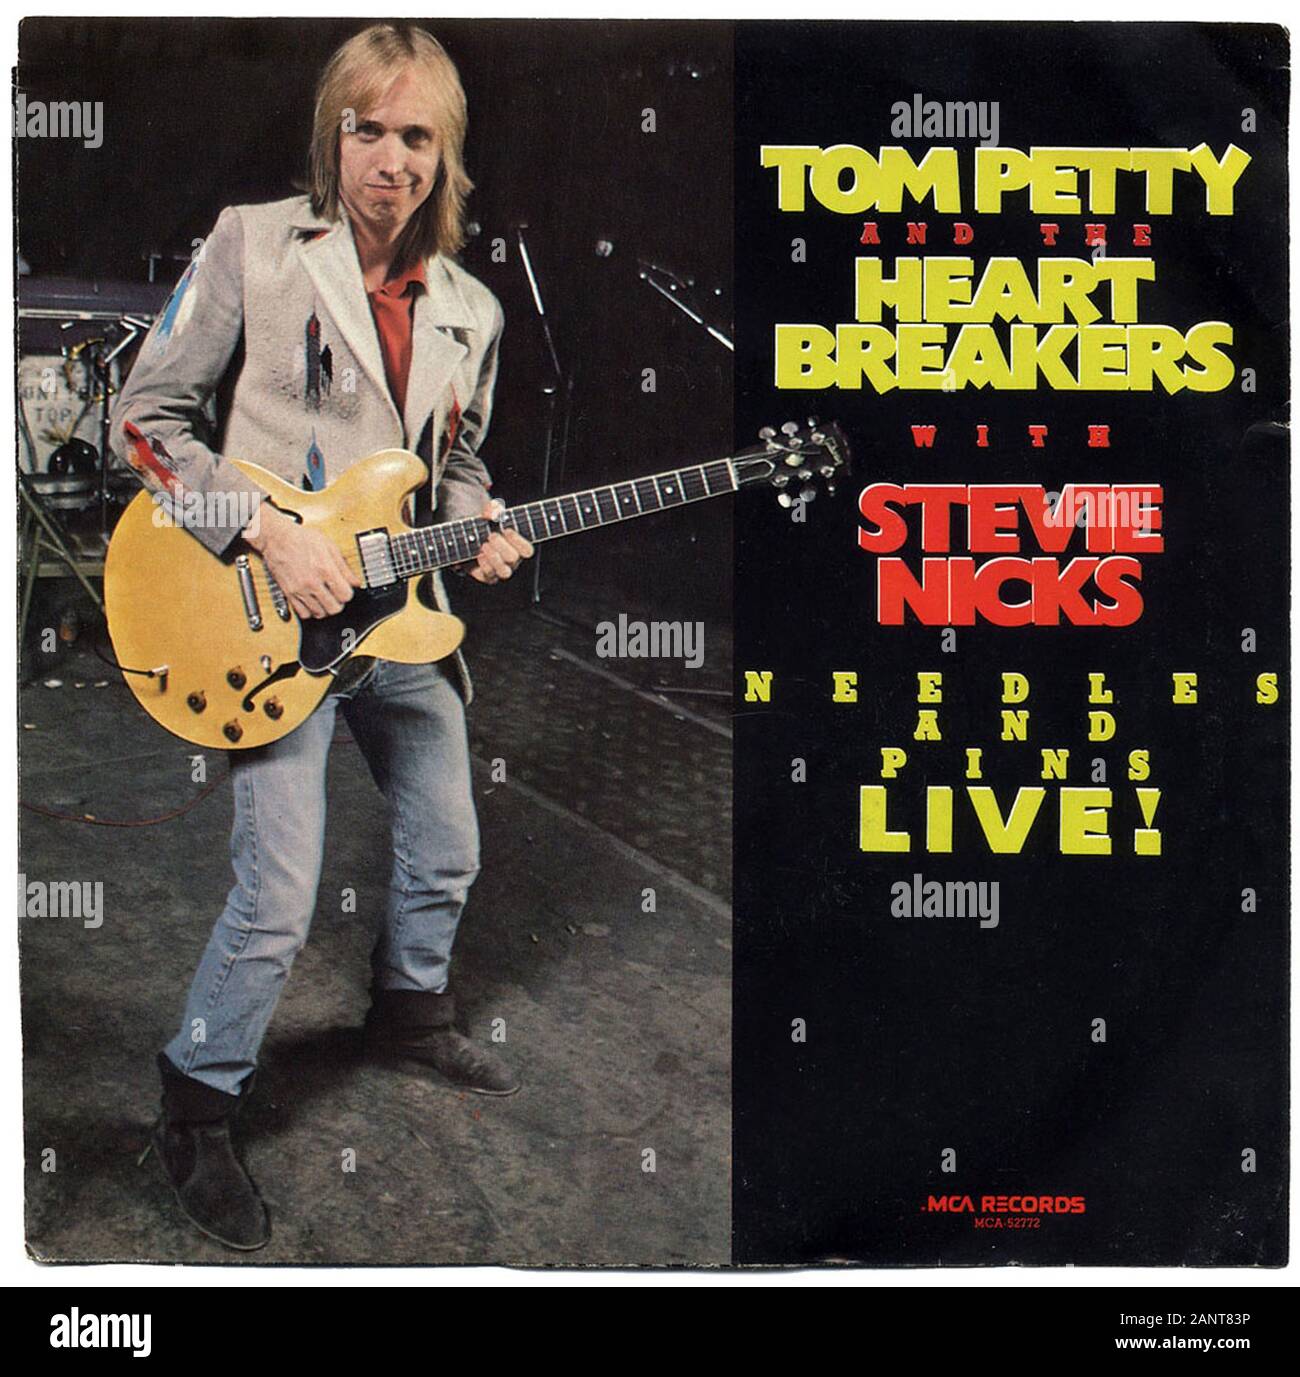 Tom Petty and the Heartbreakers with Stevie Nicks - Needles And Pins  (Live!) - Classic vintage vinyl album Stock Photo - Alamy